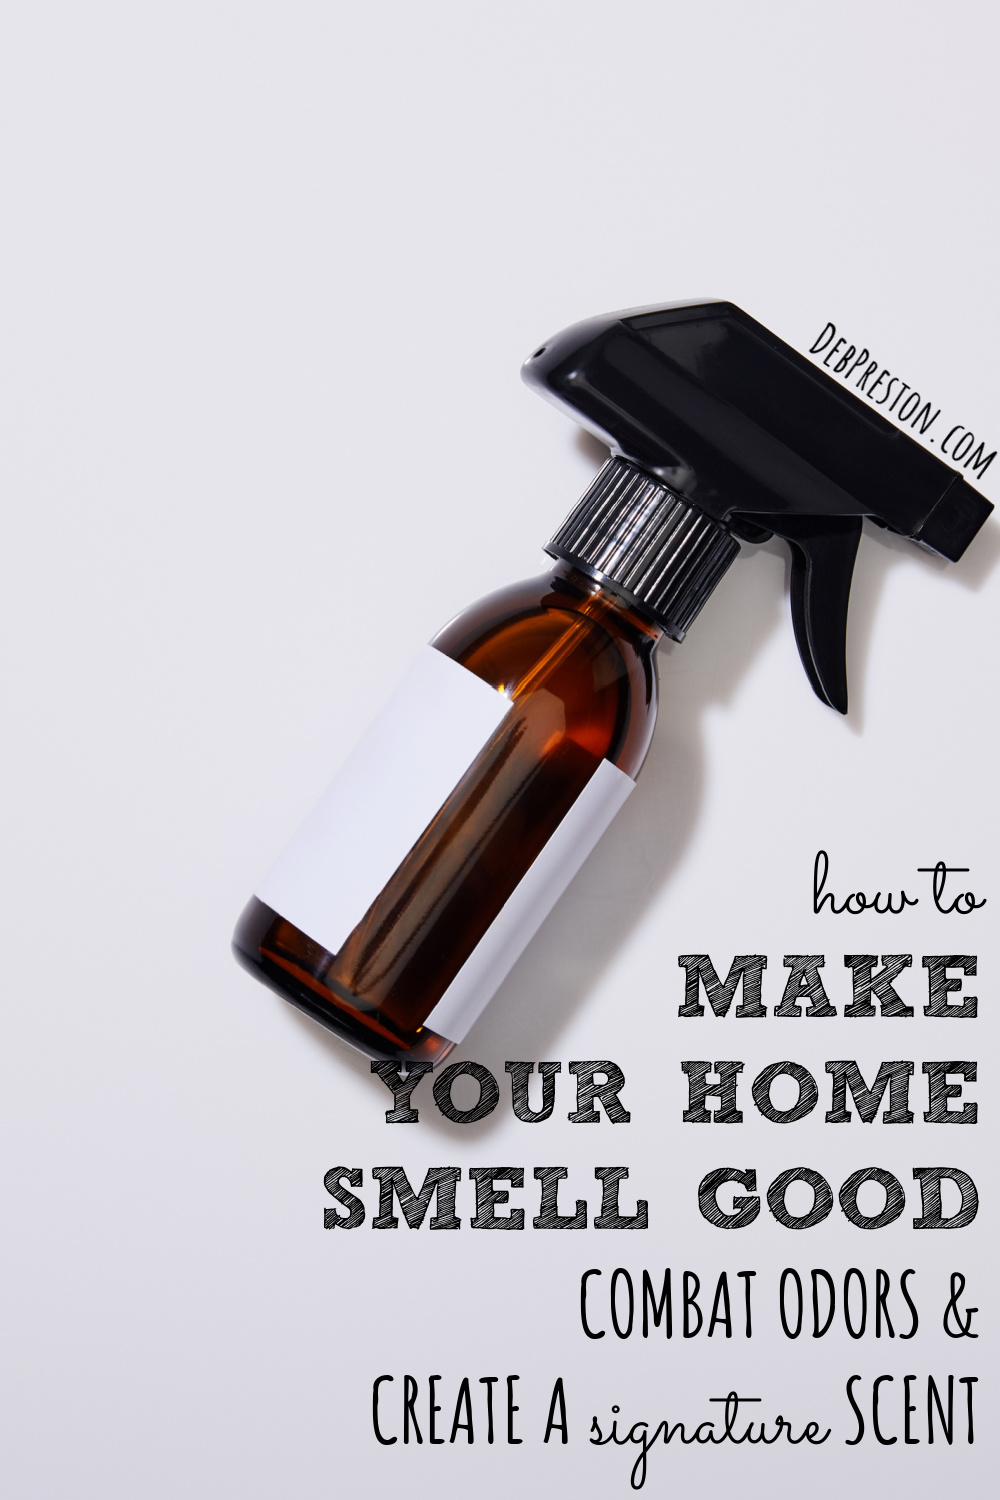 Smelly Odors Are No Match for This DIY Air Freshener